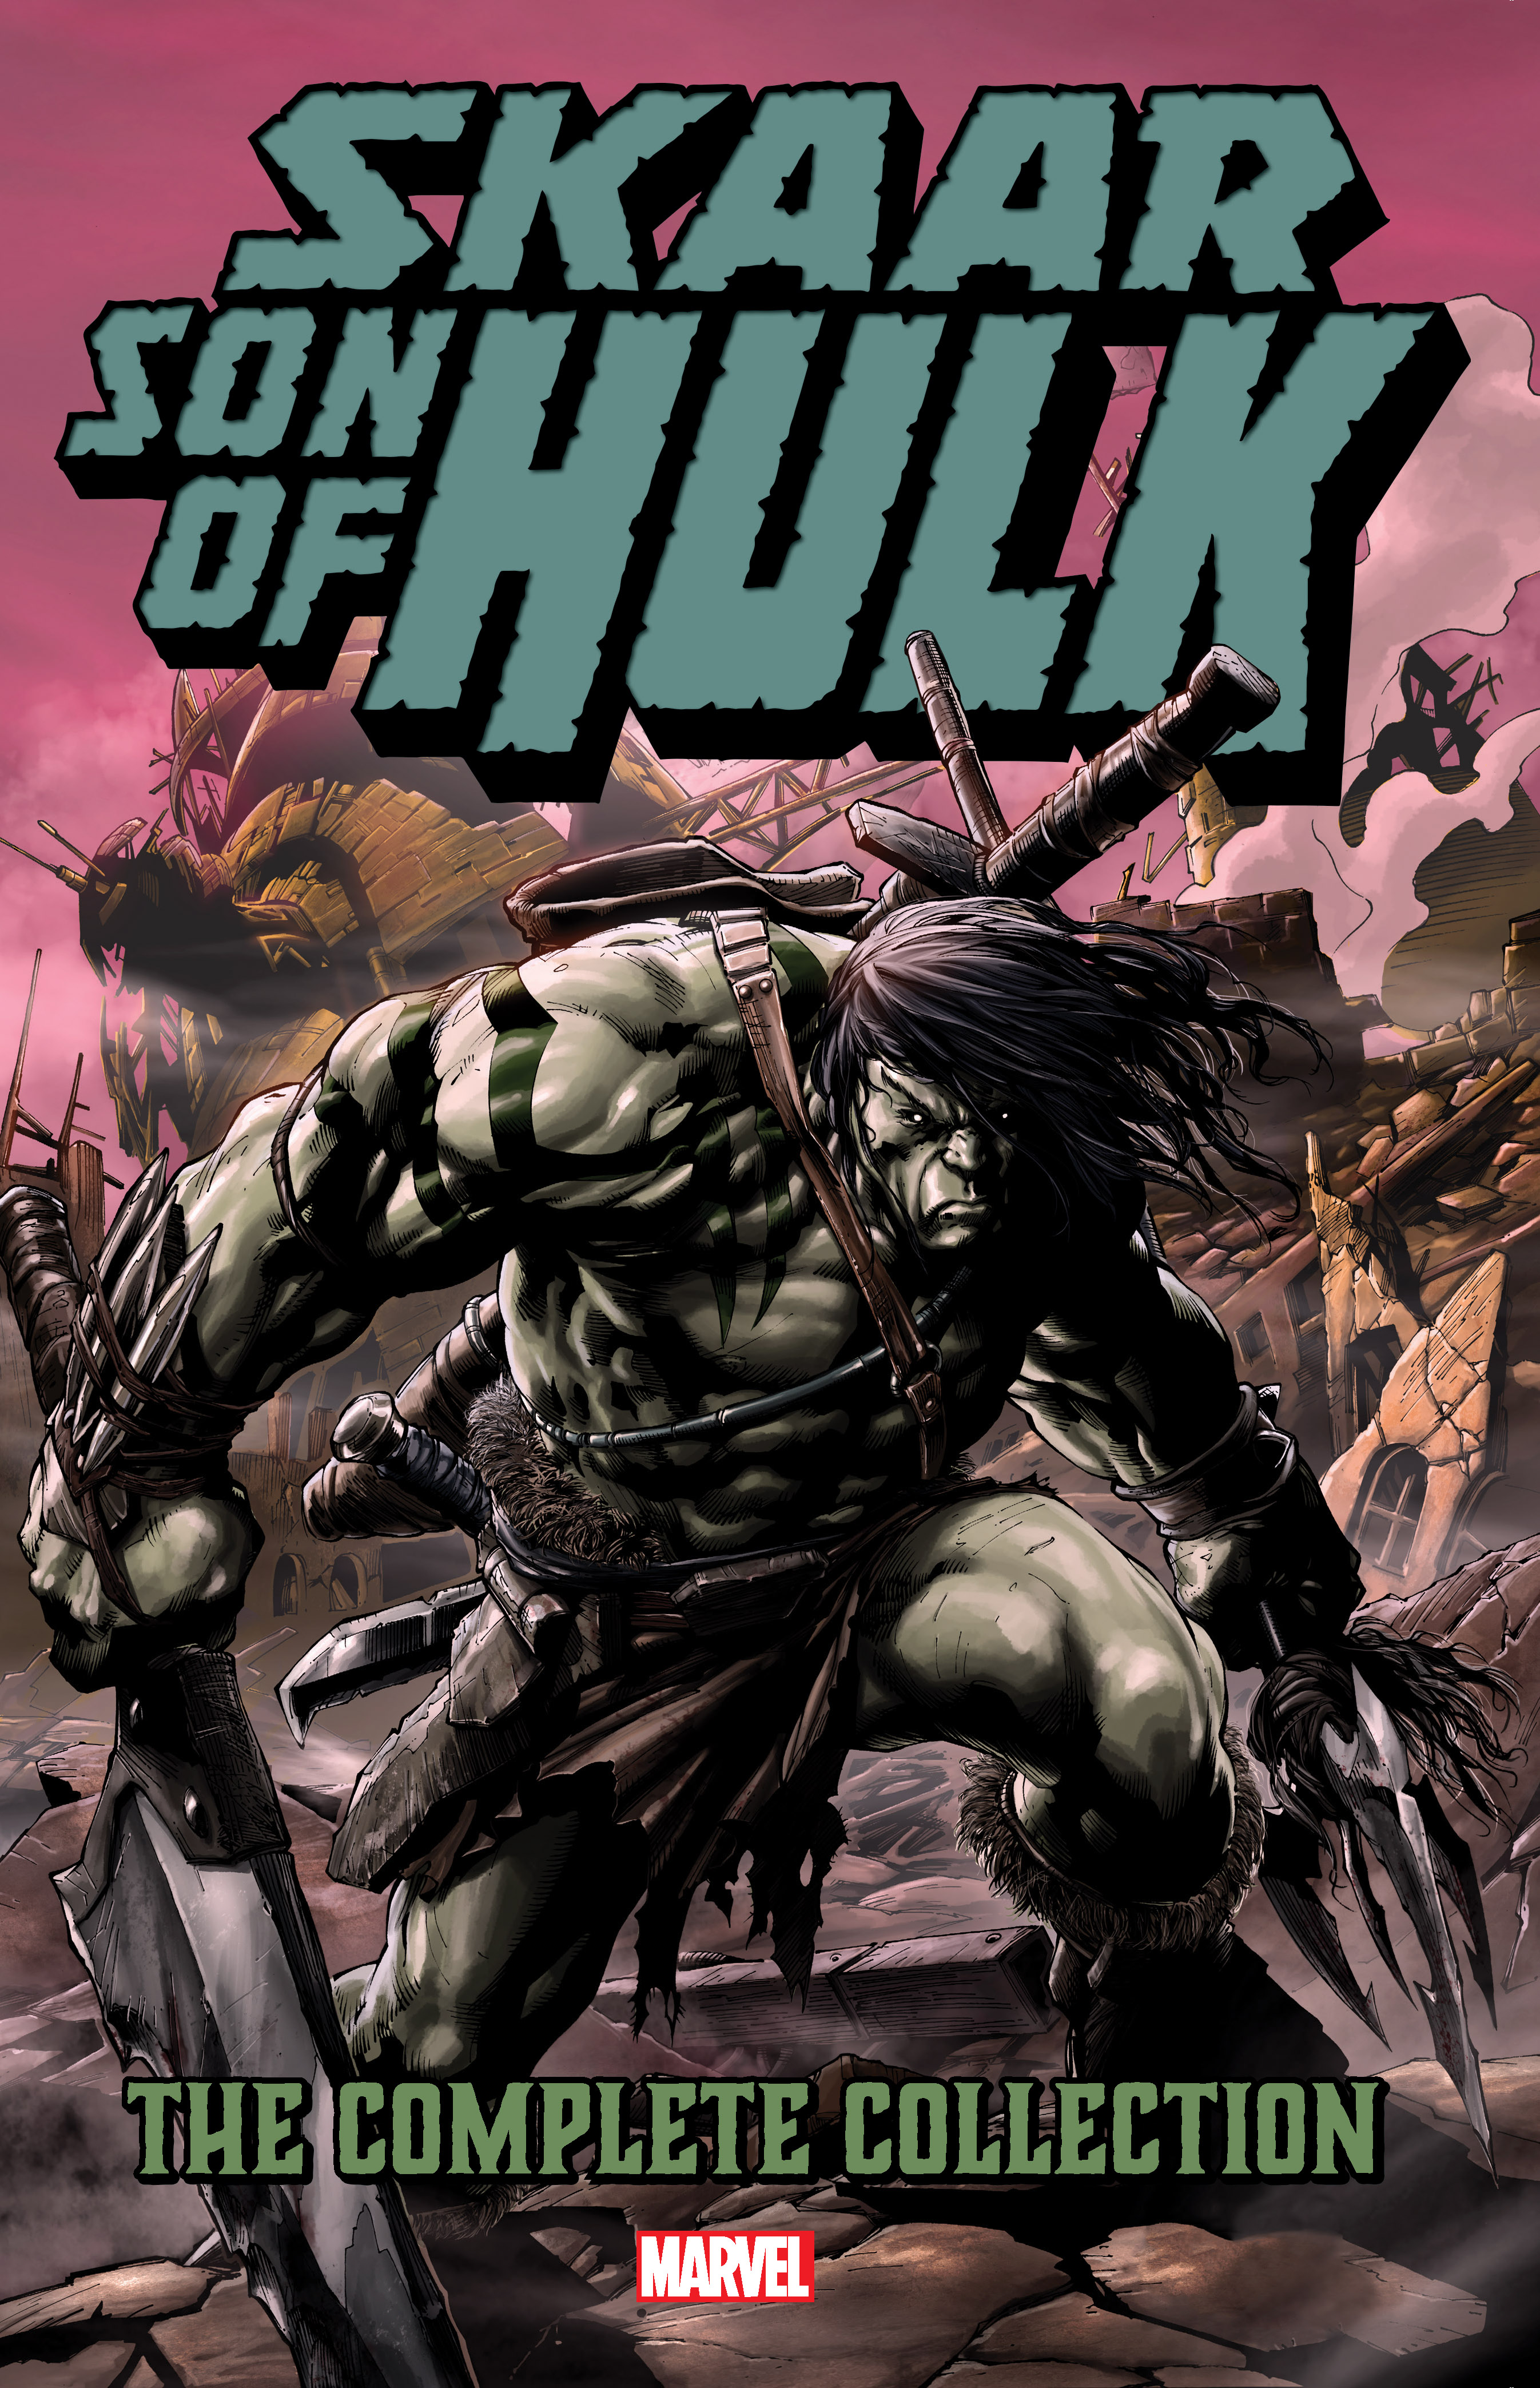 Skaar: Son Of Hulk - The Complete Collection (Trade Paperback)